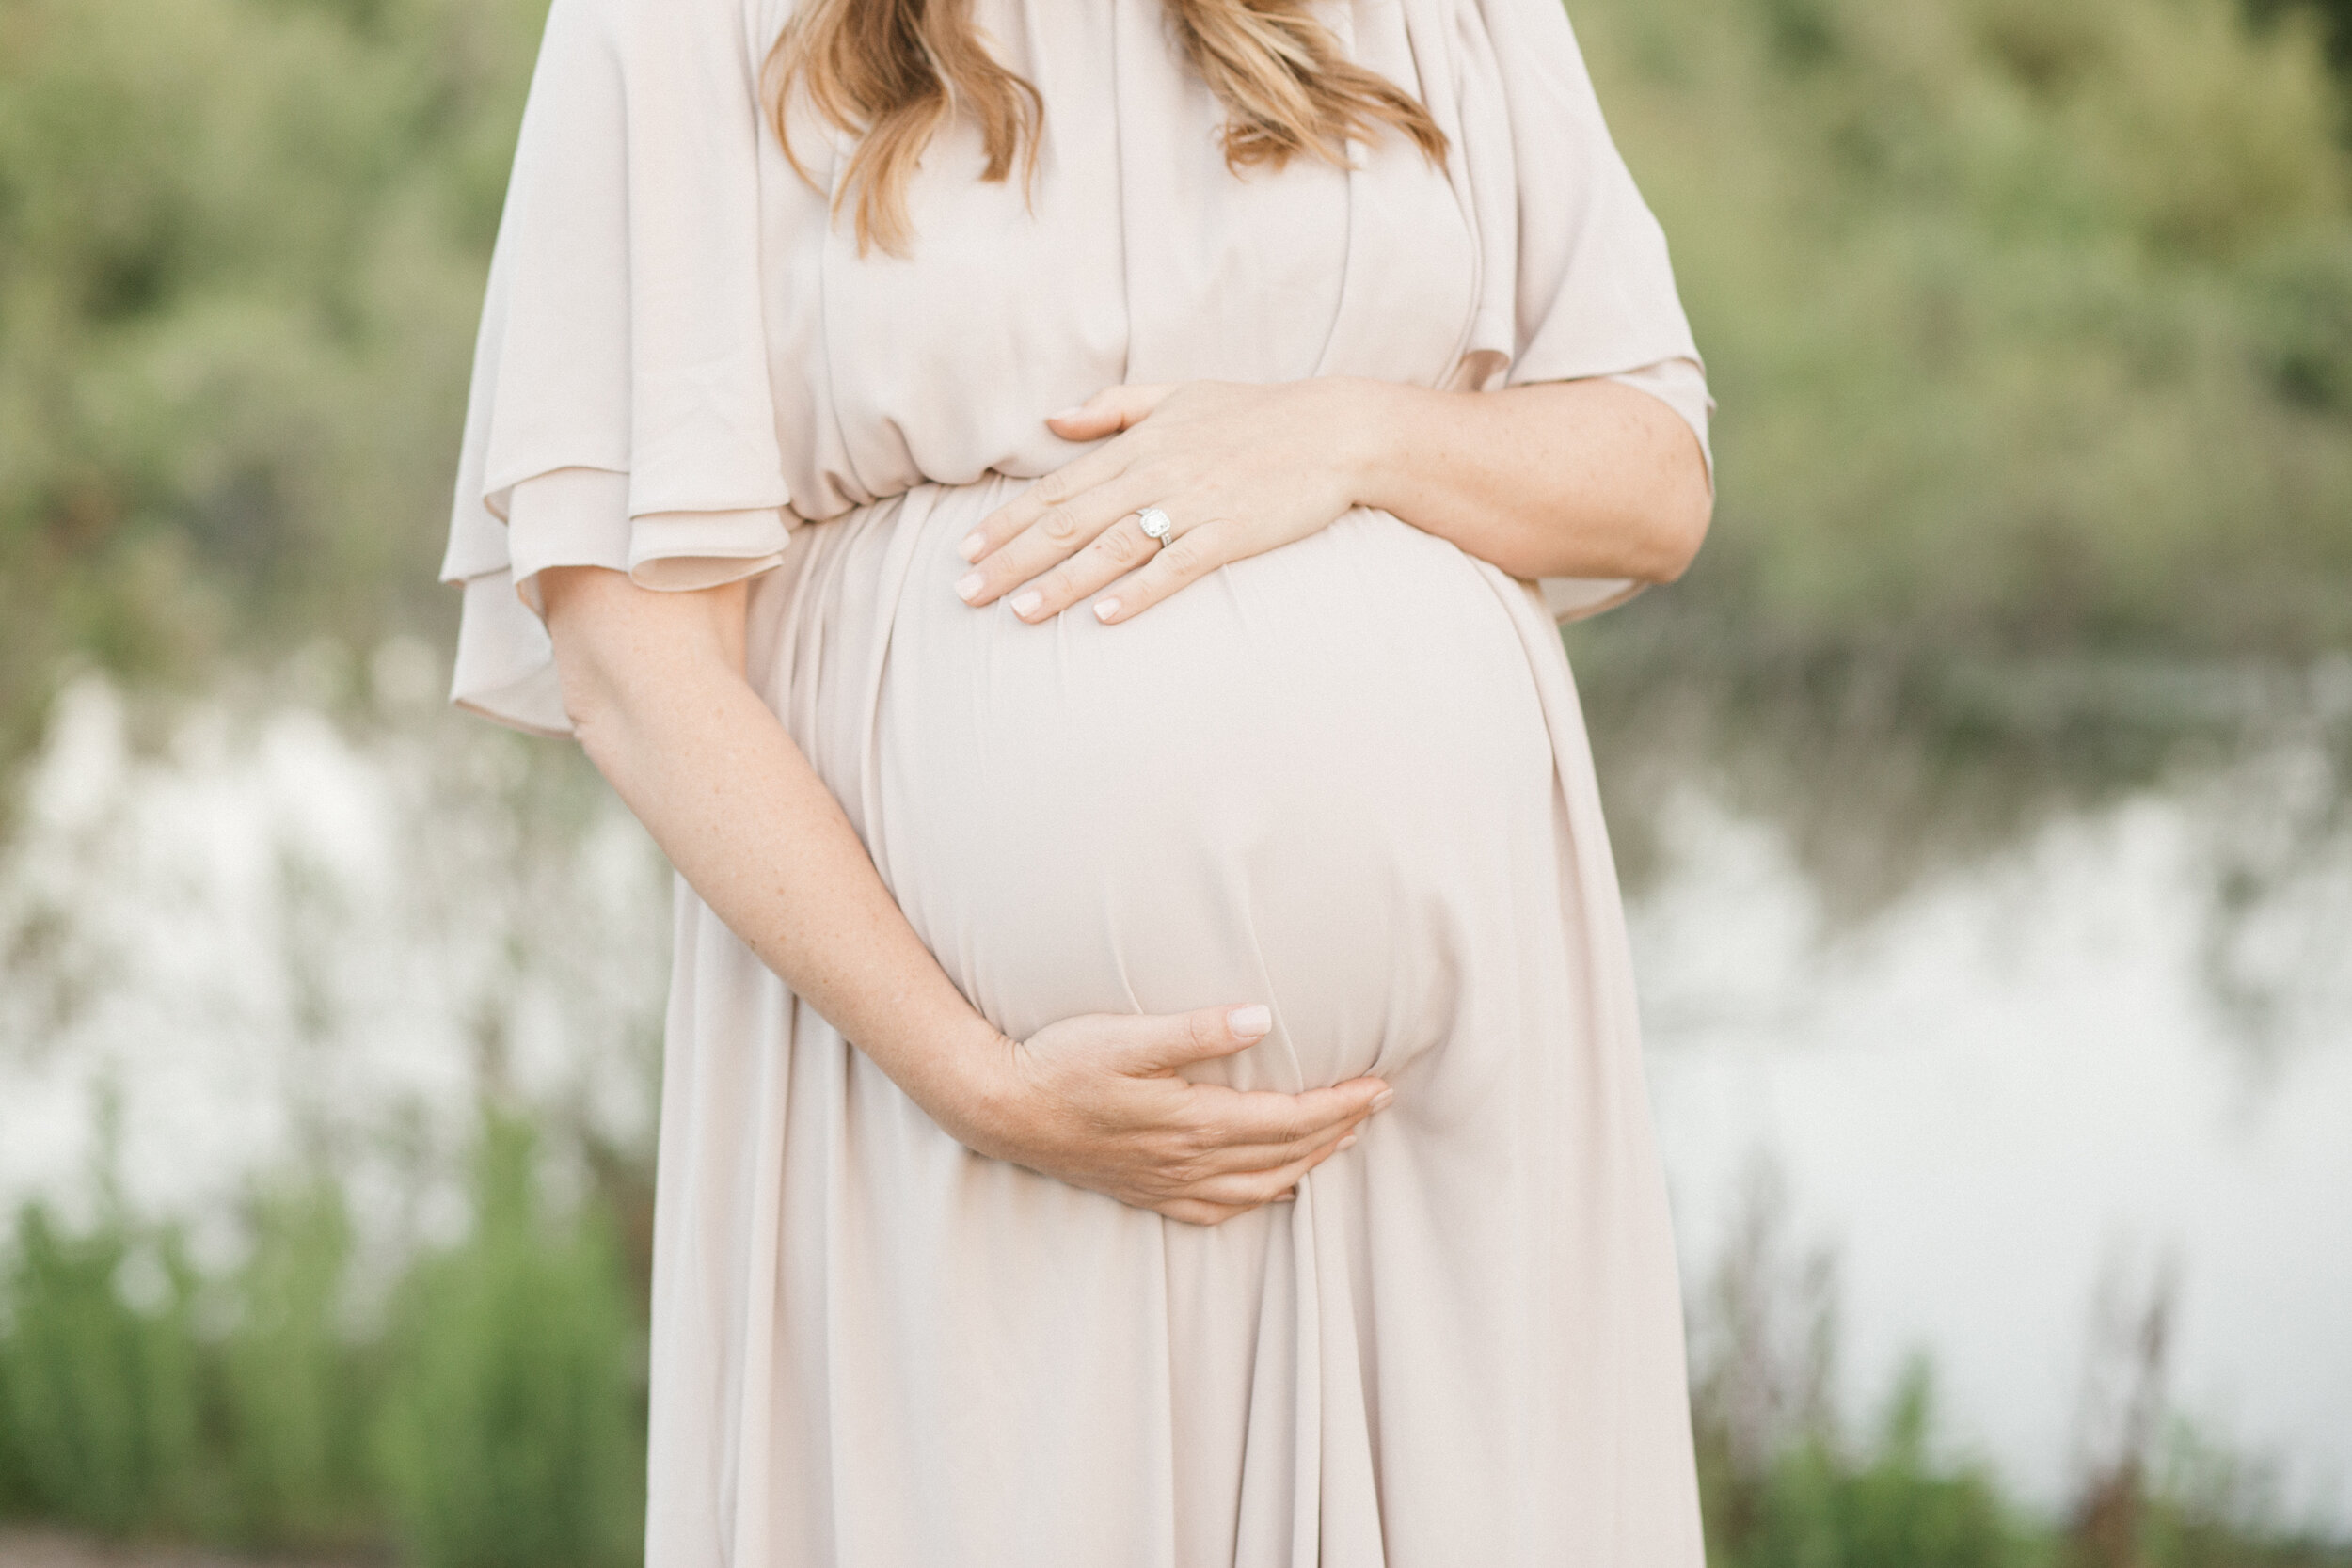  In our maternity series experts in their field  share crucial information to insure you receive the the knowledge that will support you while pregnant and working.  